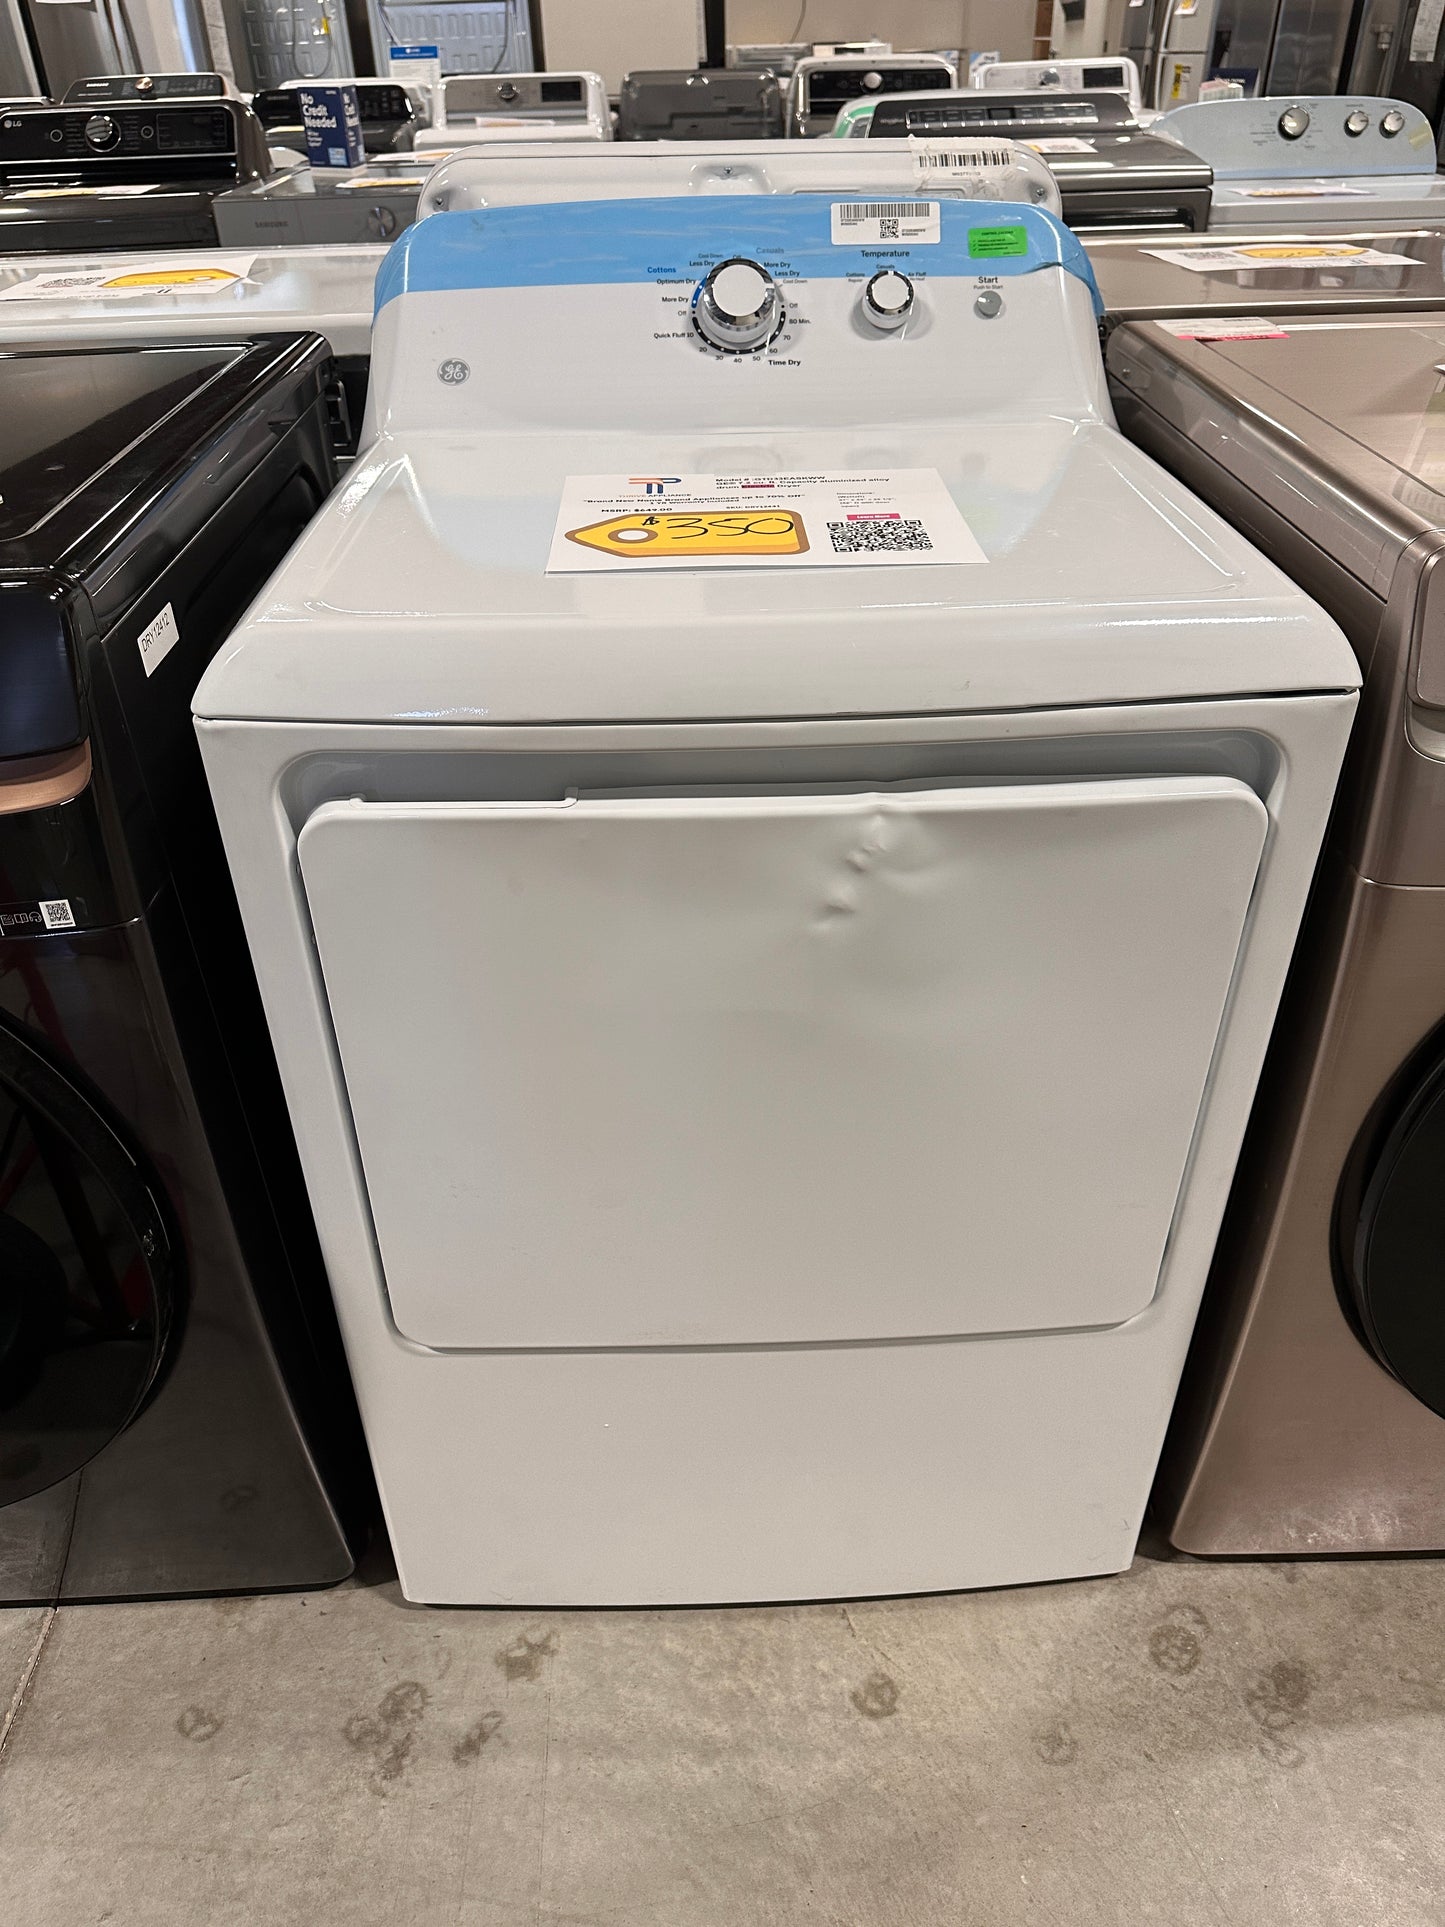 NEW GE - 7.2 Cu. Ft. Electric Dryer - White  MODEL: GTD33EASK0WW  DRY12441